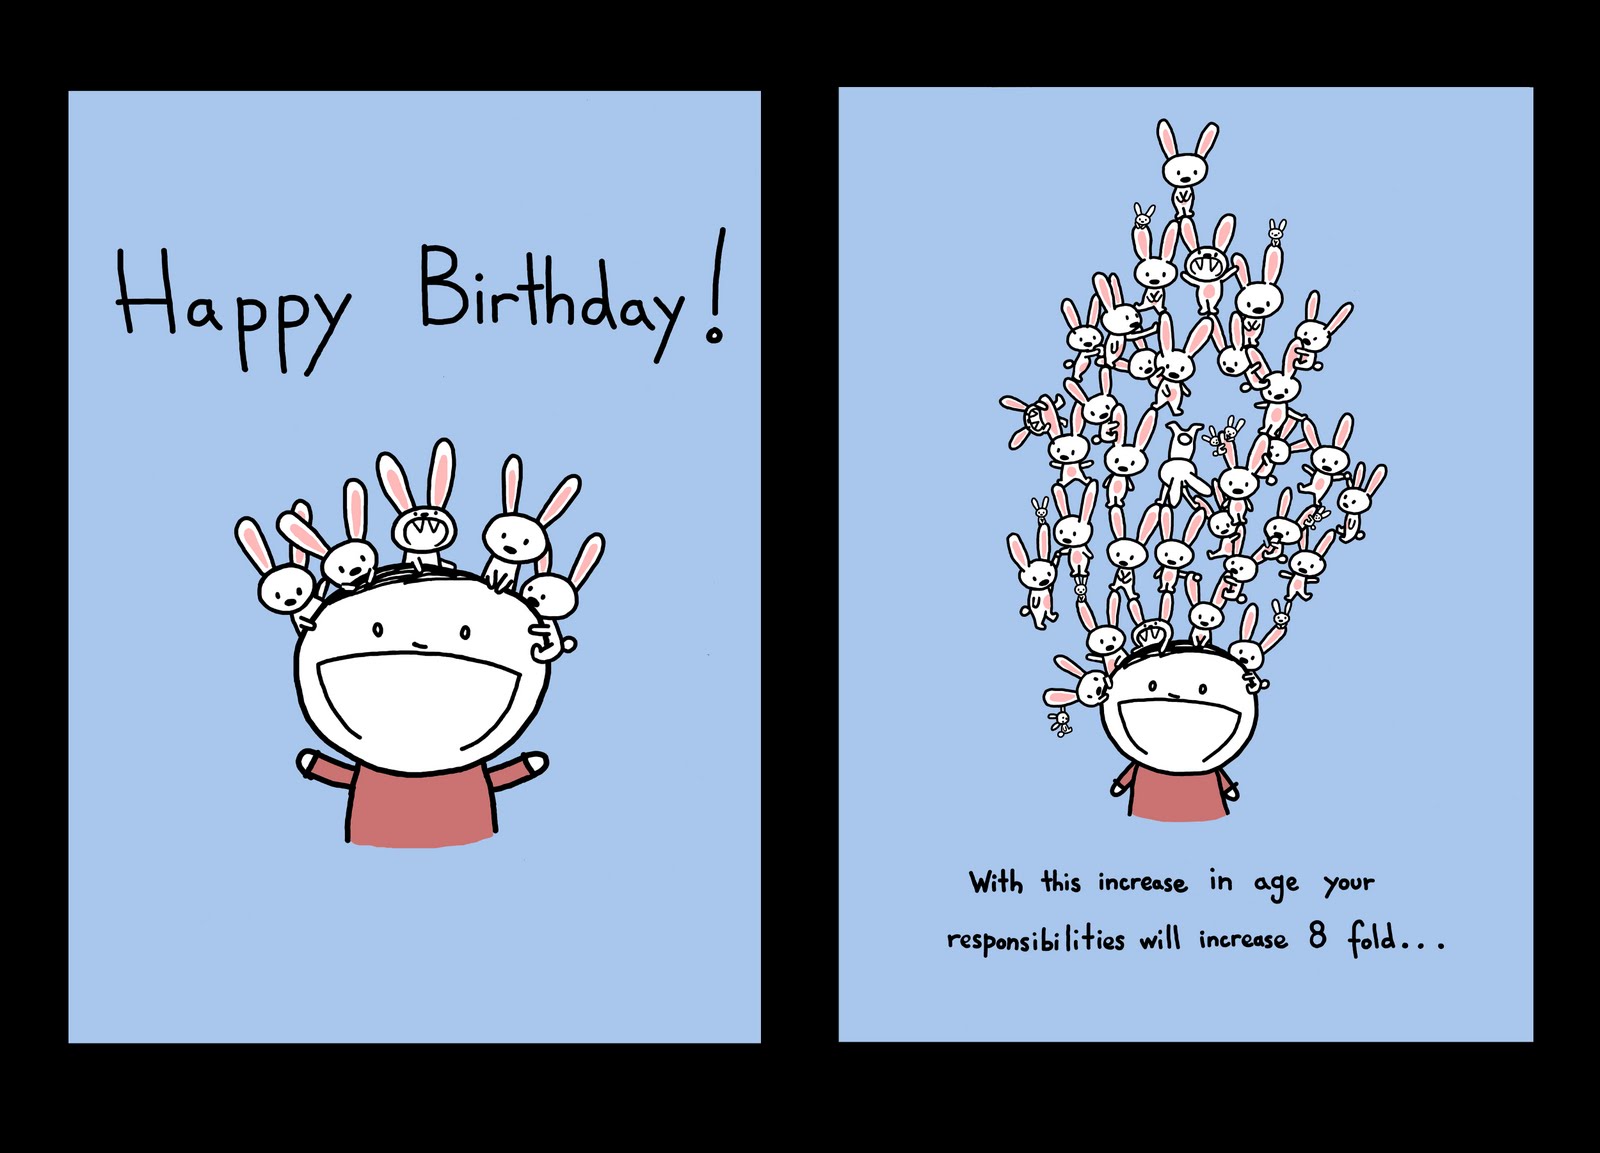 Funny happy Birthday Images for Kids 💐 — Free happy bday pictures and  photos 